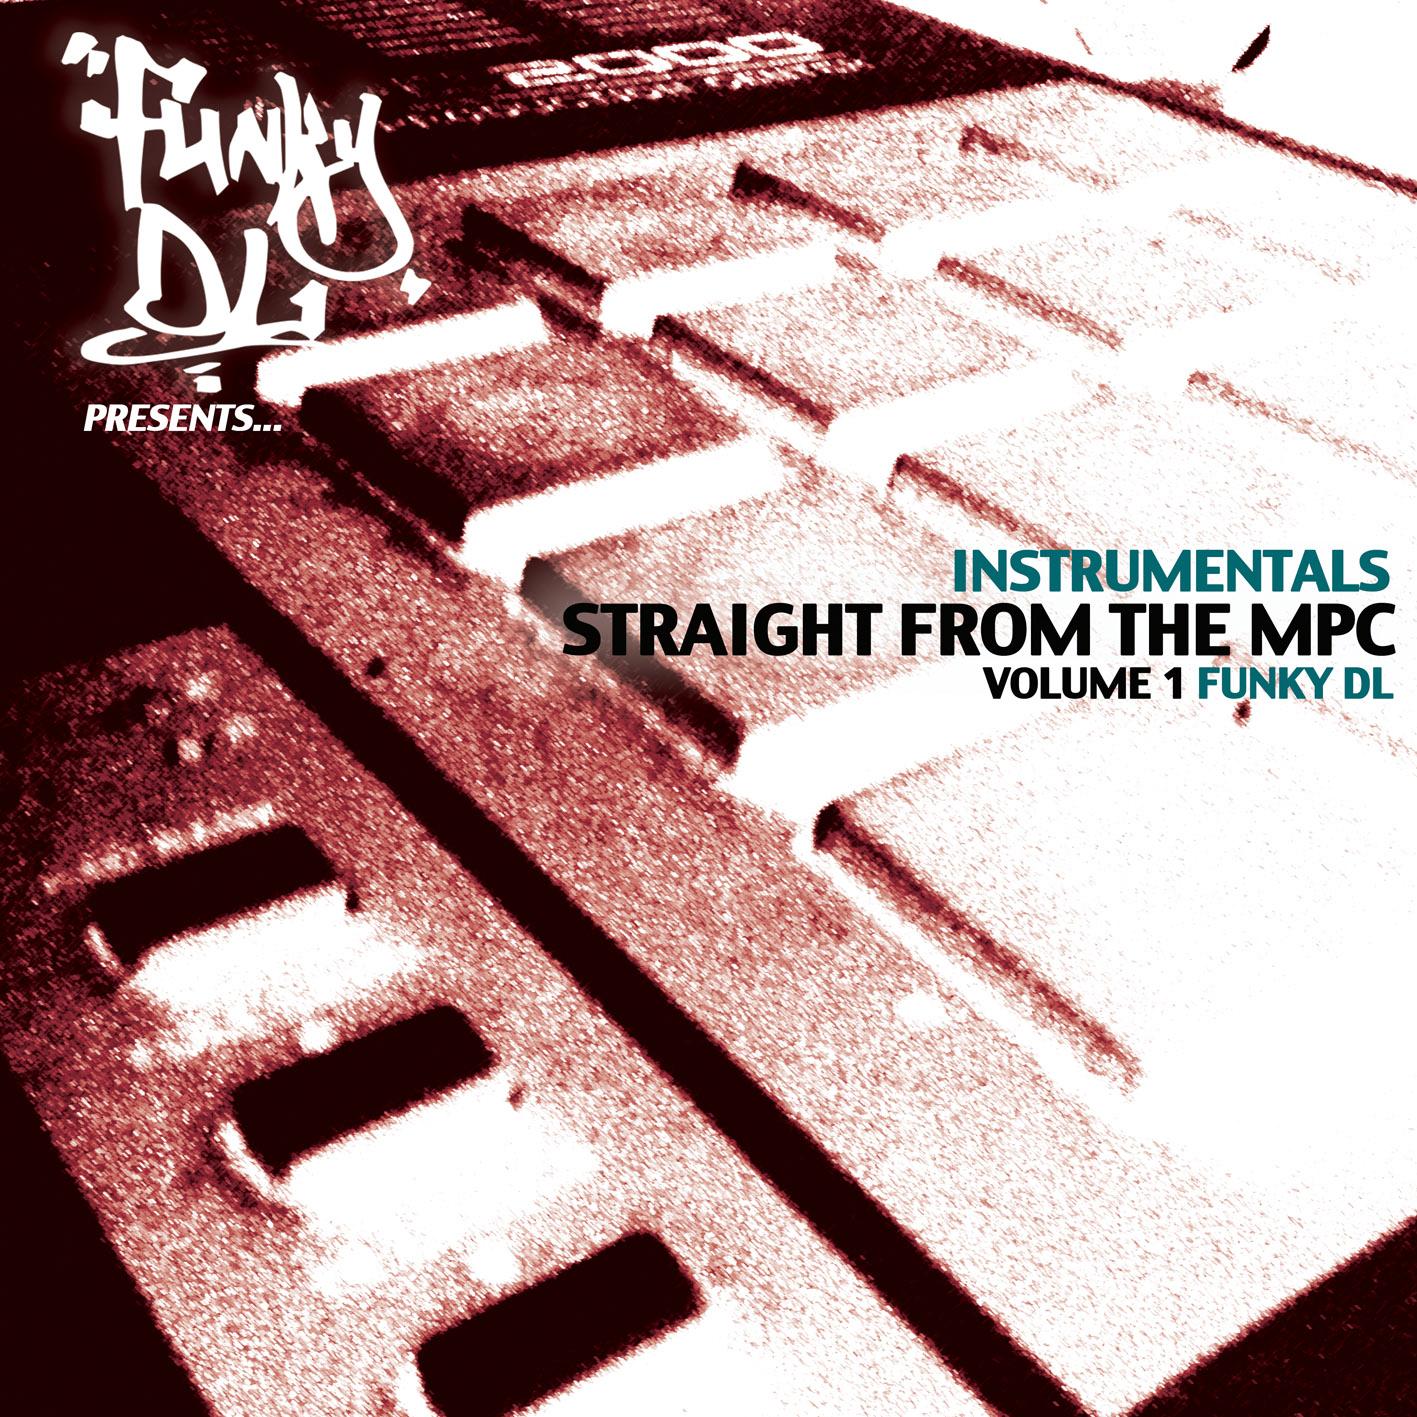 Instrumentals Straight From The MPC, Volume 1 – Funky DL